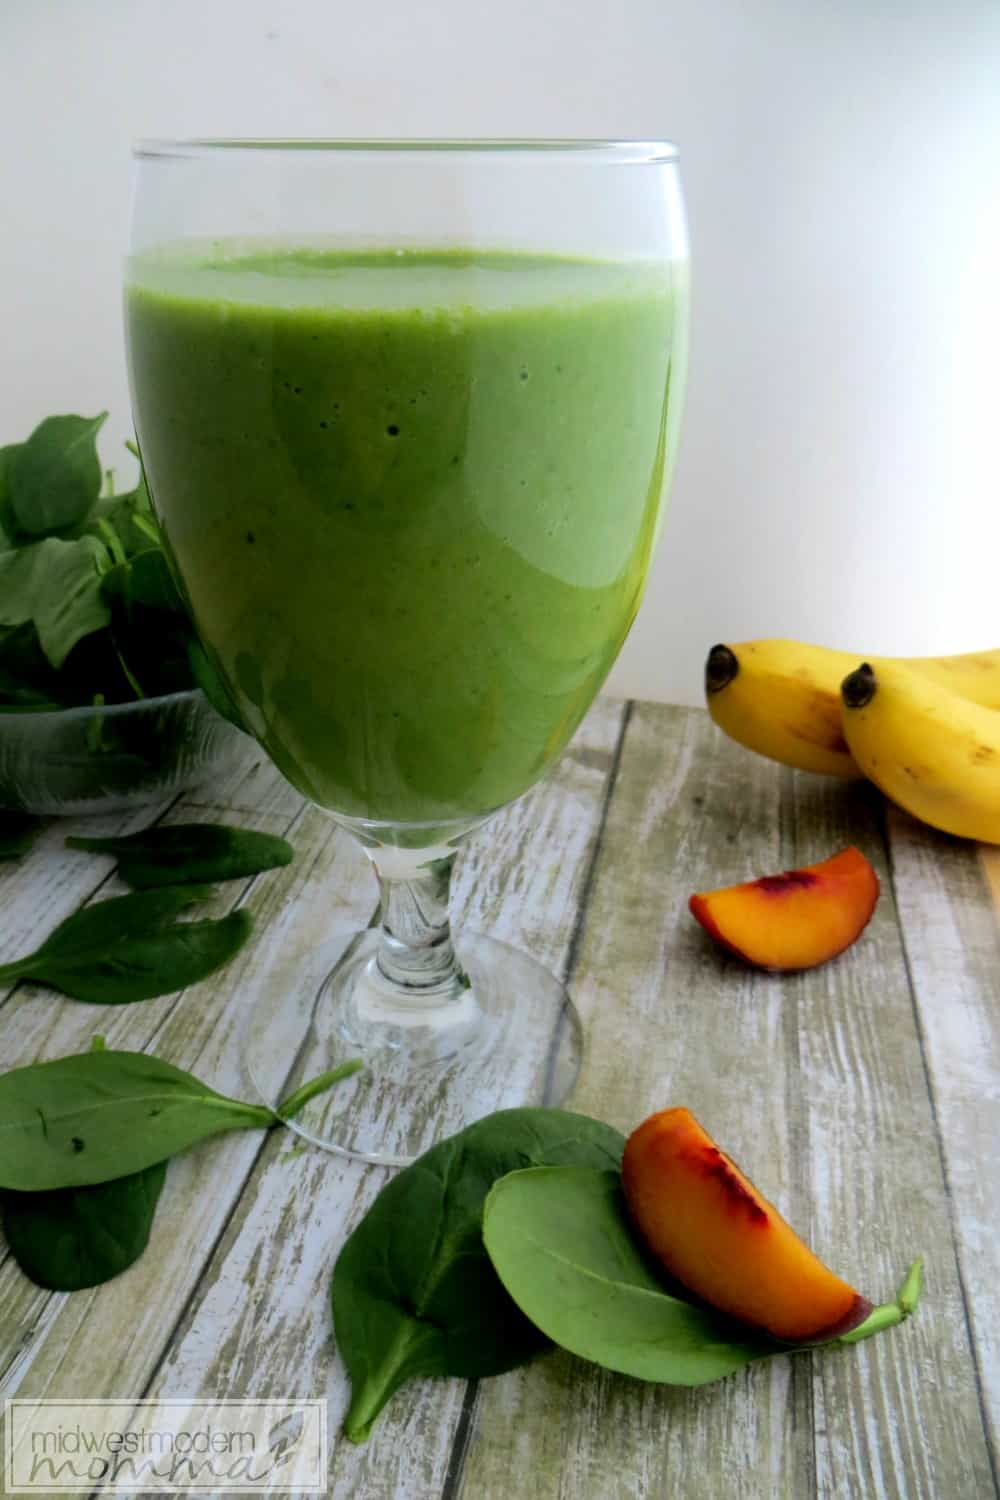 Green smoothie in a glass cup on a wooden surface with spinach, peach slices, and 2 bananas in the background.